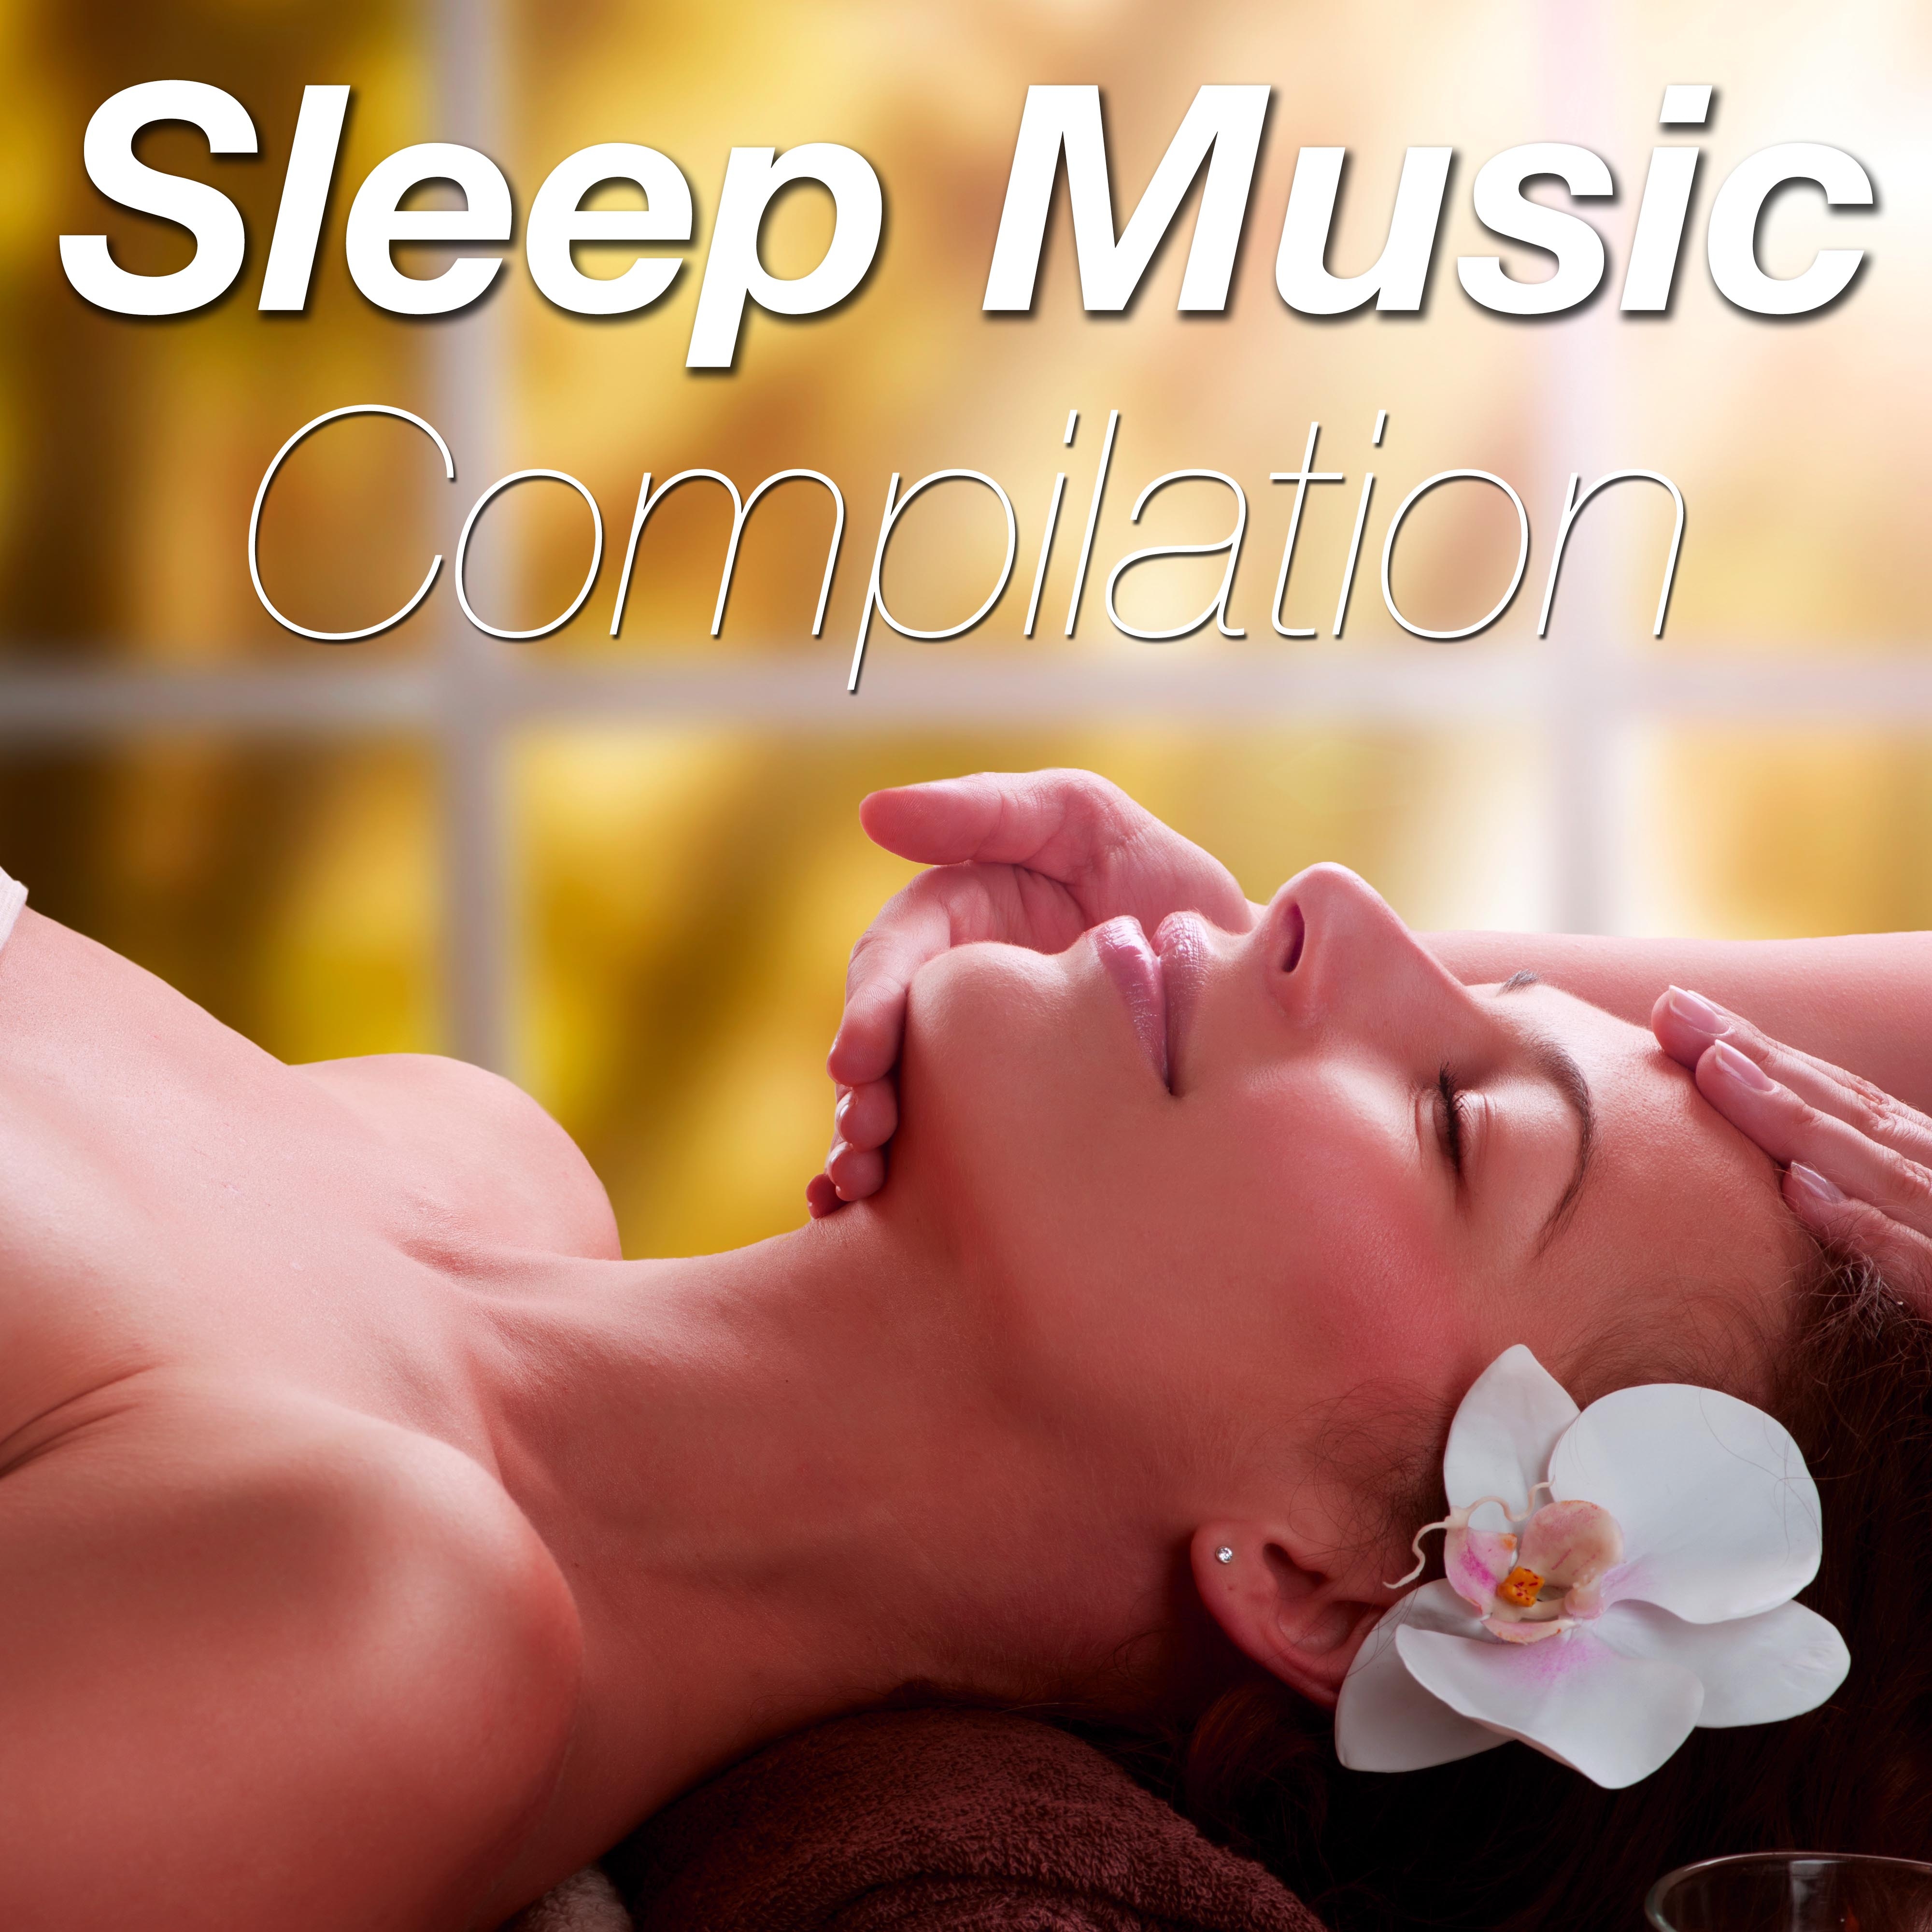 Sleep Music Compilation: the Best Relaxing Lullabies at Bedtime to Sleep Deeply through the Night with White Noise, Nature Sounds, Piano and the Shakuhachi Flute